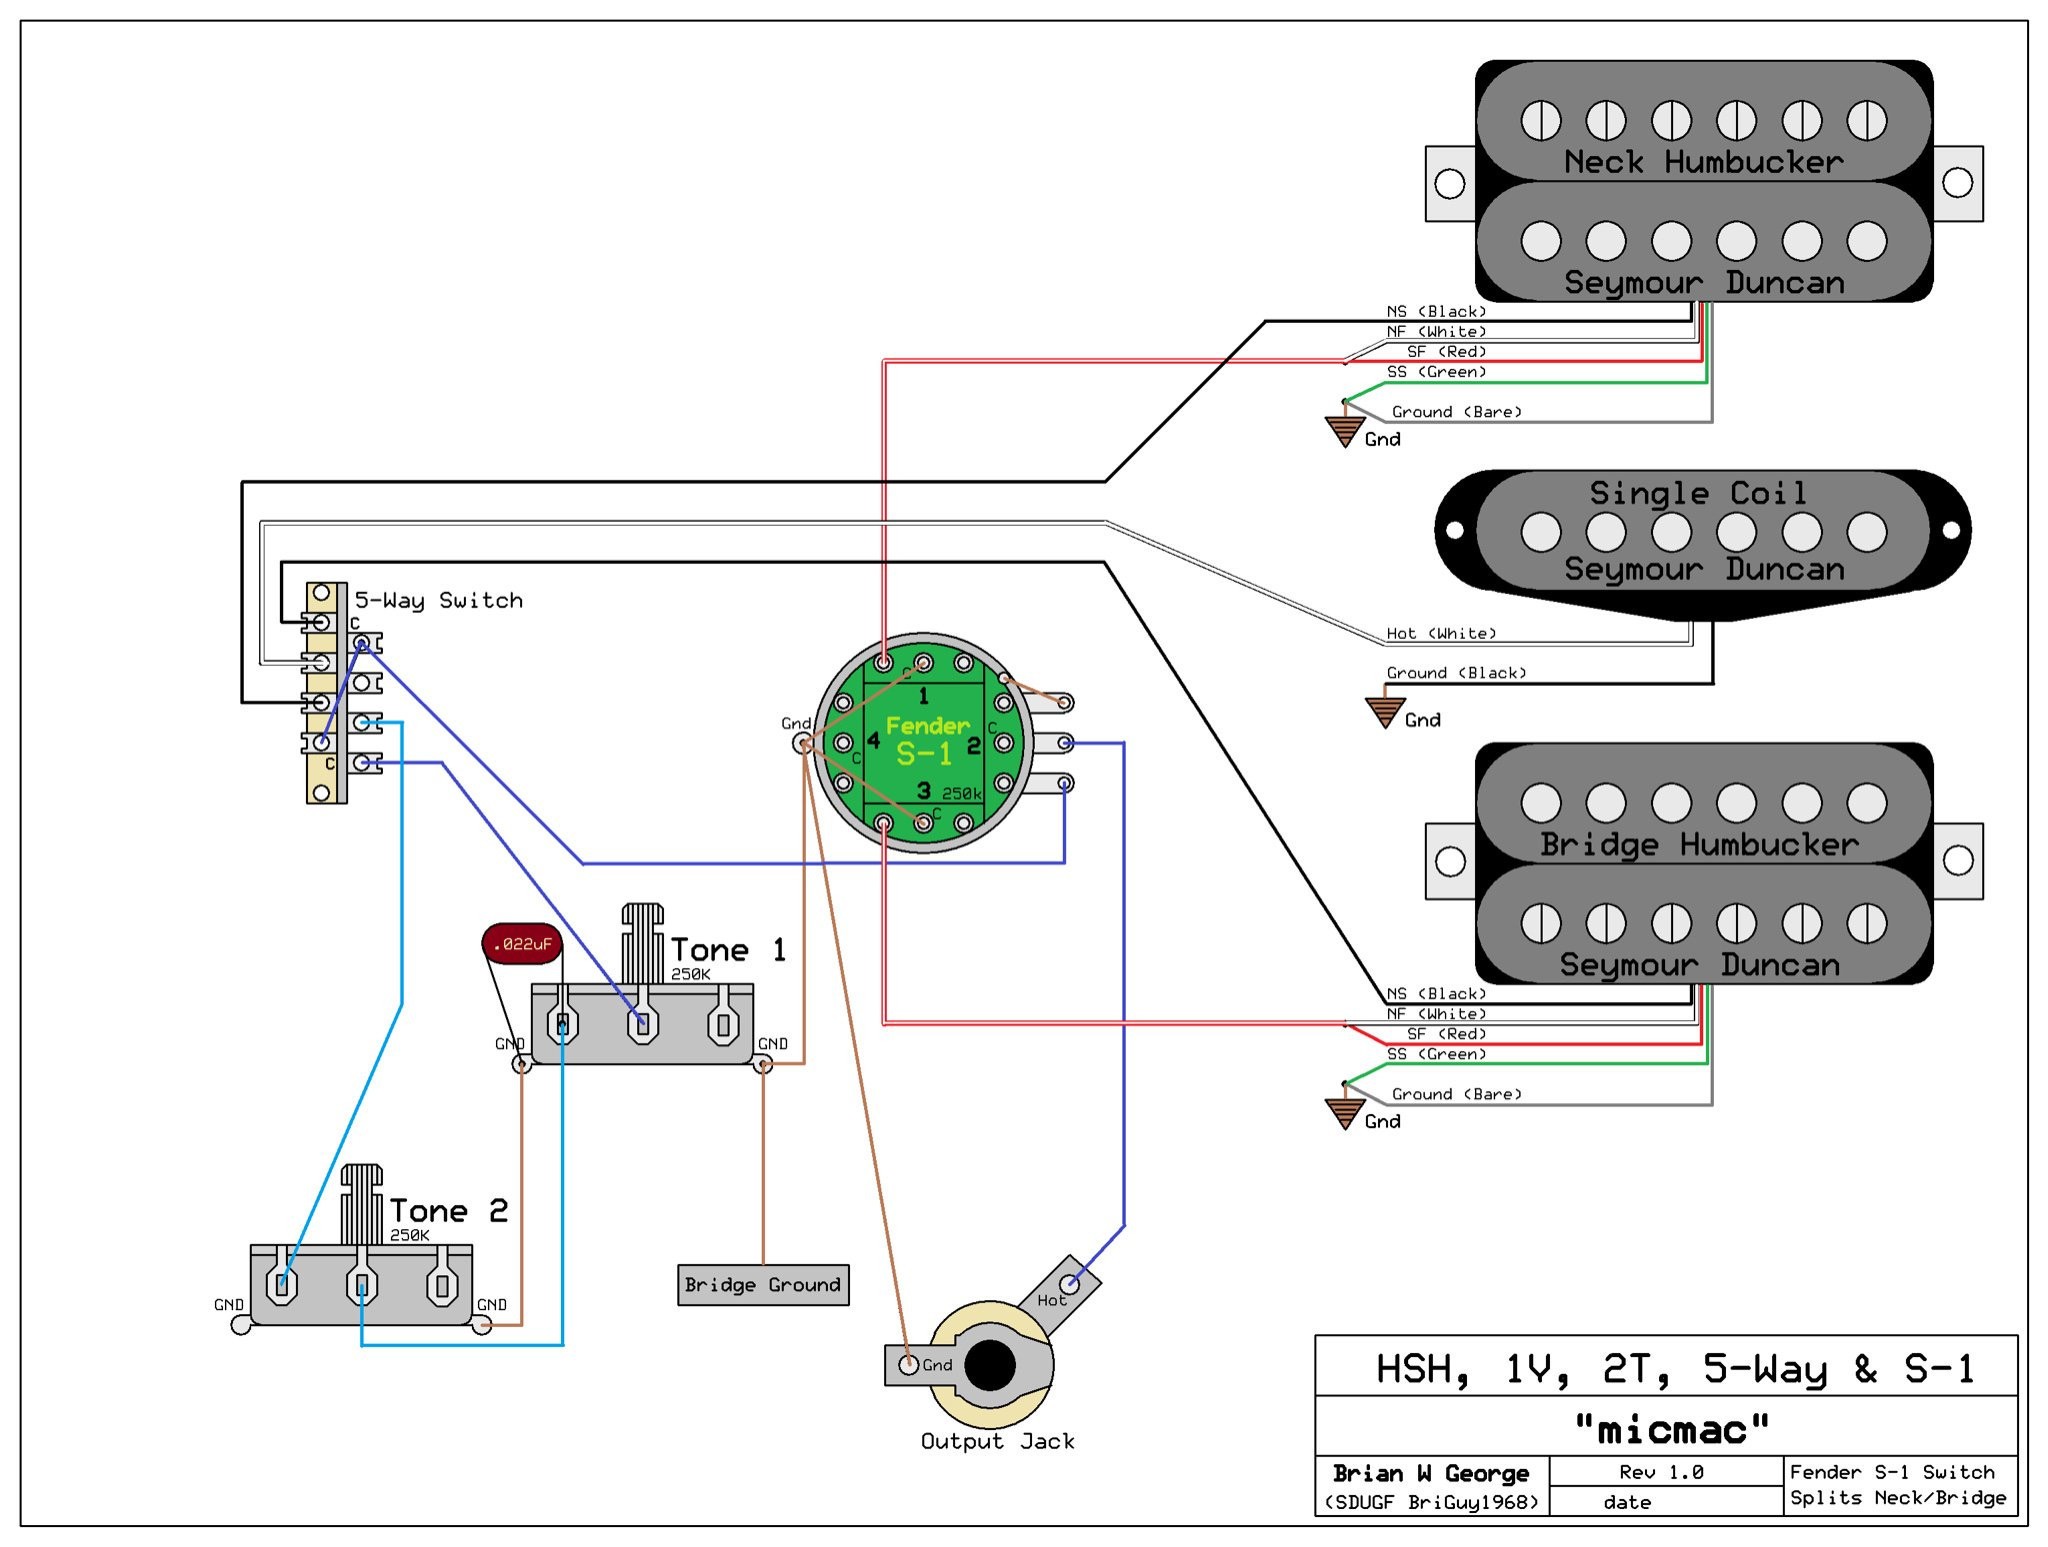 Wiring Diagram For 5 Way Guitar Switch Inspirationa Hsh Wiring Diagram 5 Way Switch Guitar Diagrams